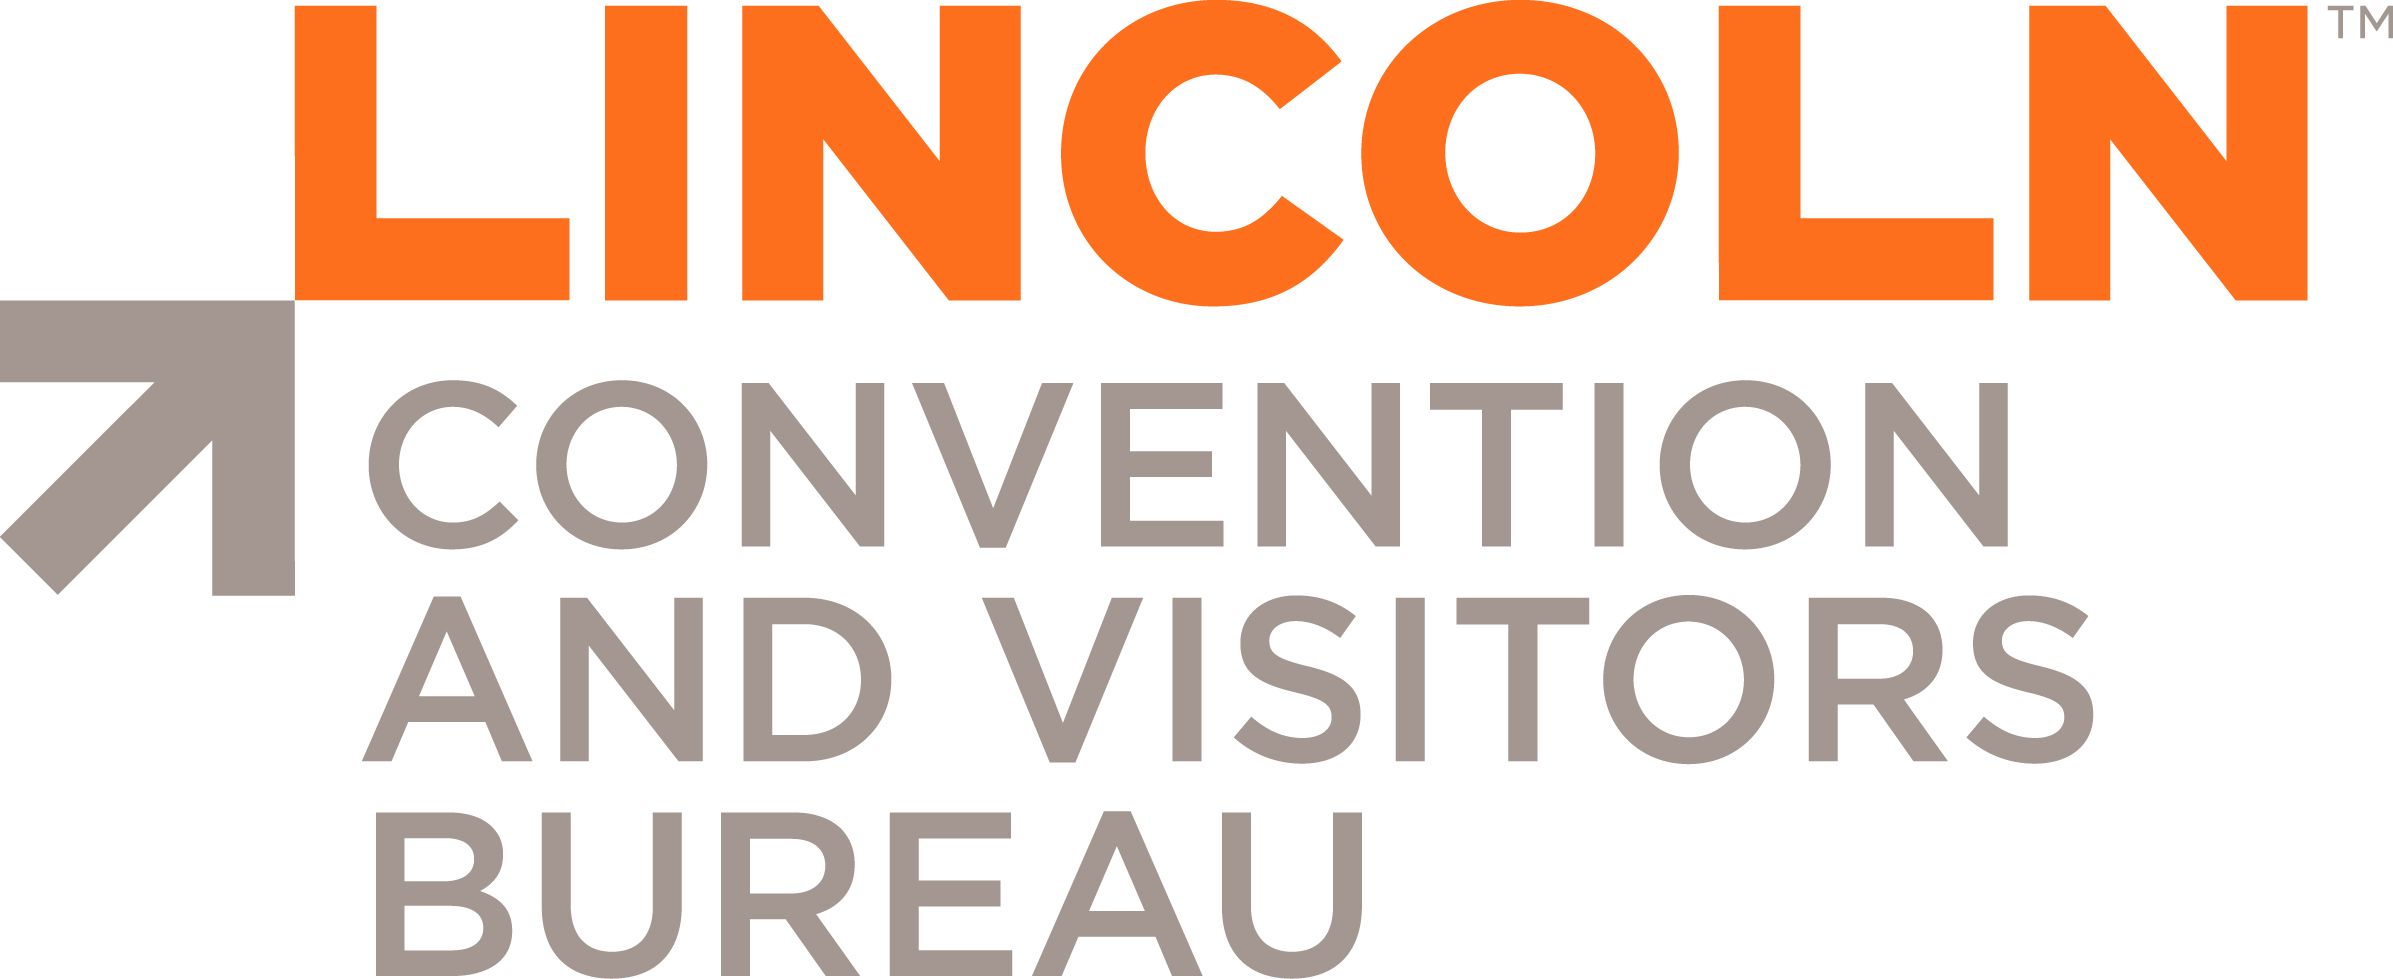 Lincoln Convention and Visitors Bureau